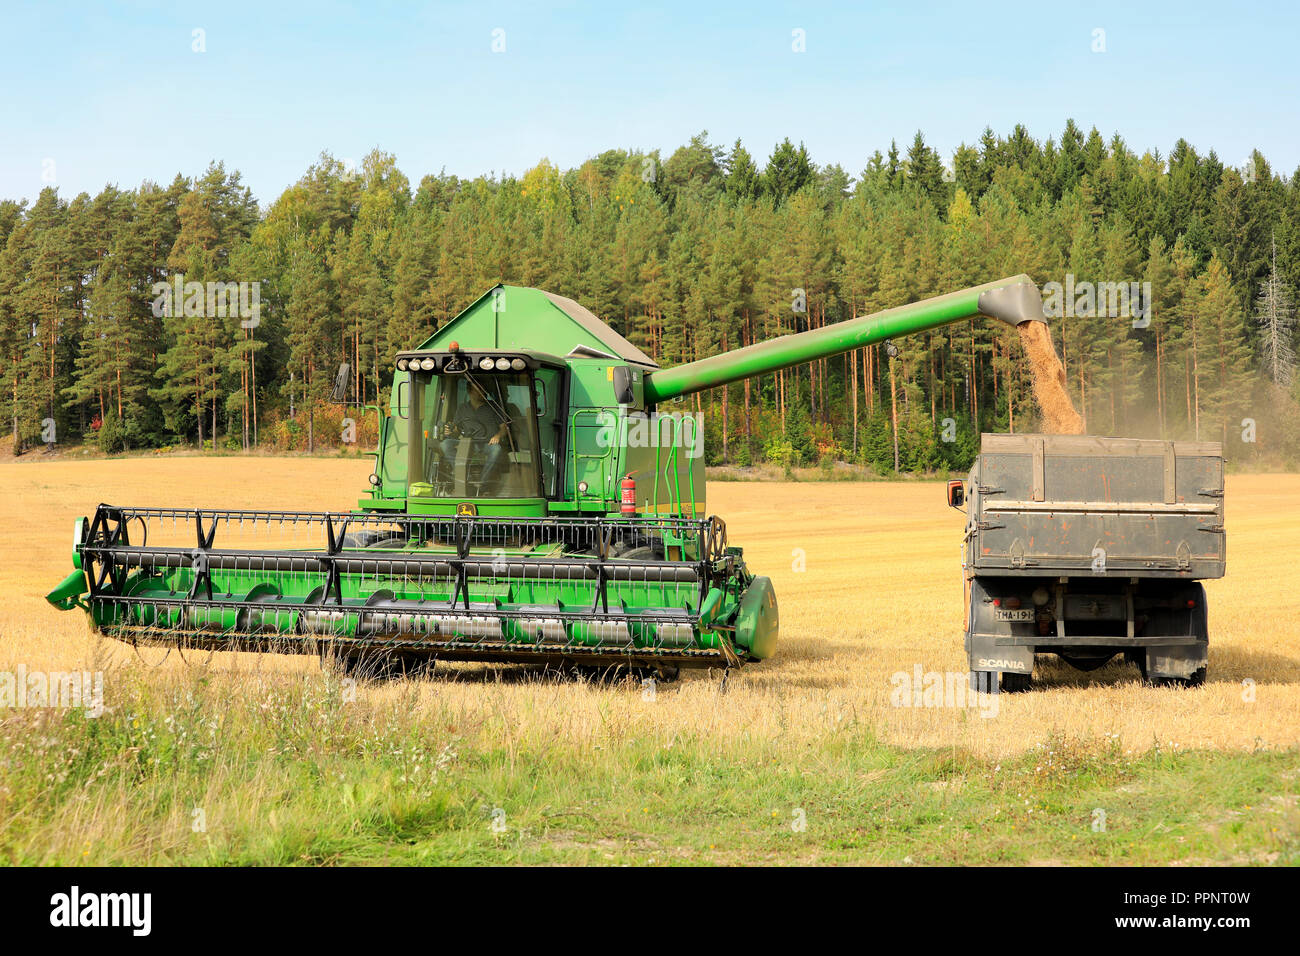 Salo, Finland - September 8, 2018: John Deere combine unloads harvested grain onto truck trailer on a clear day of autumn in South of Finland. Stock Photo